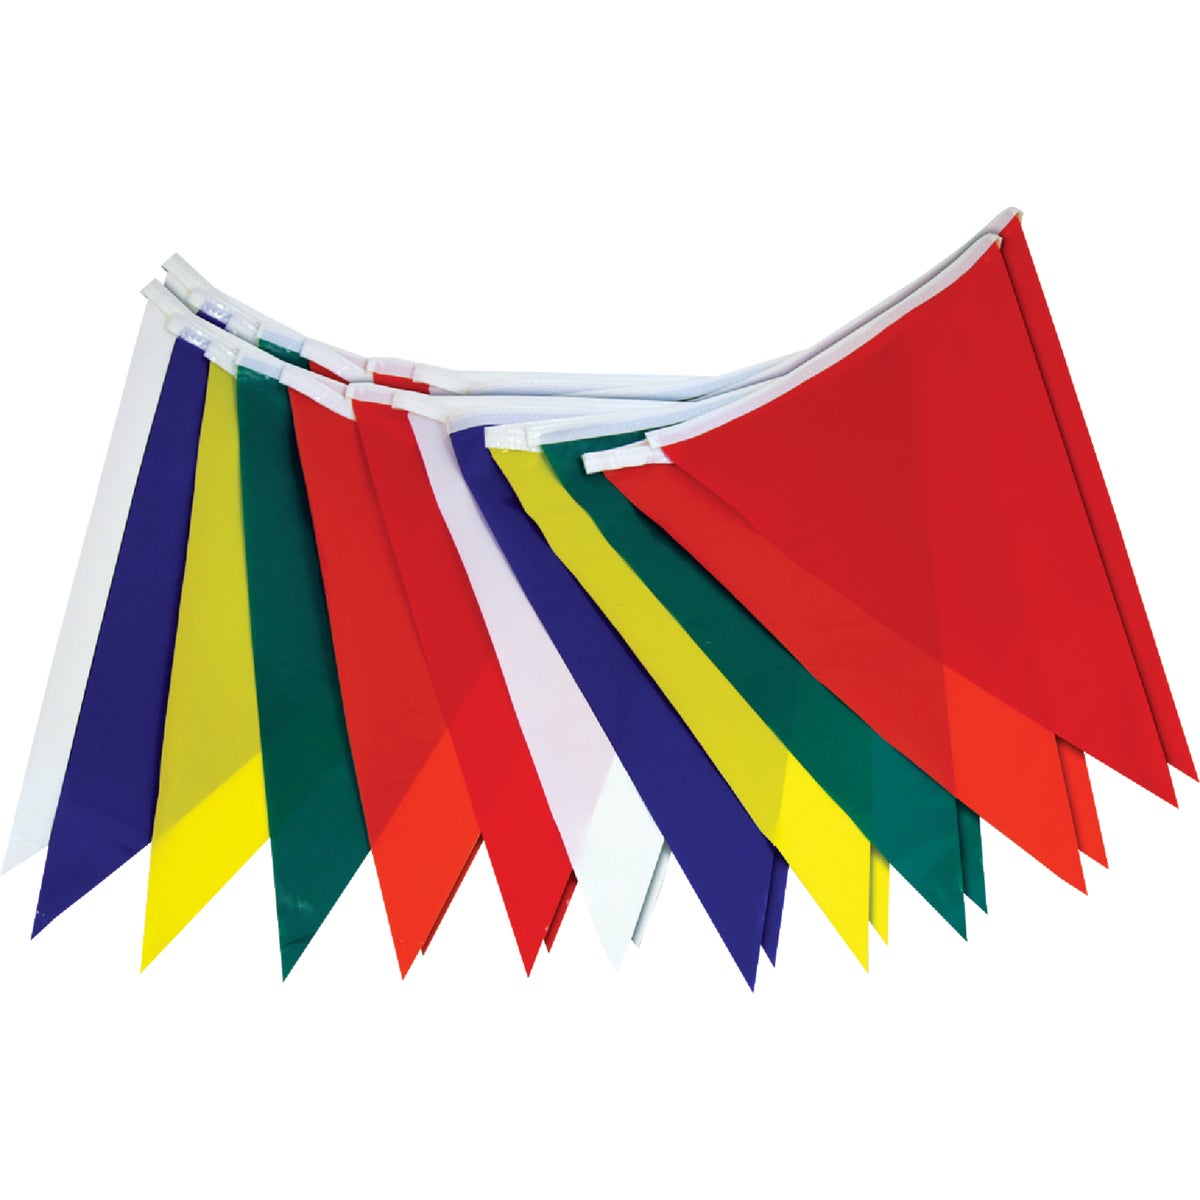 Hy-Ko Products 778787 50 ft. Plastic Pennant Flag